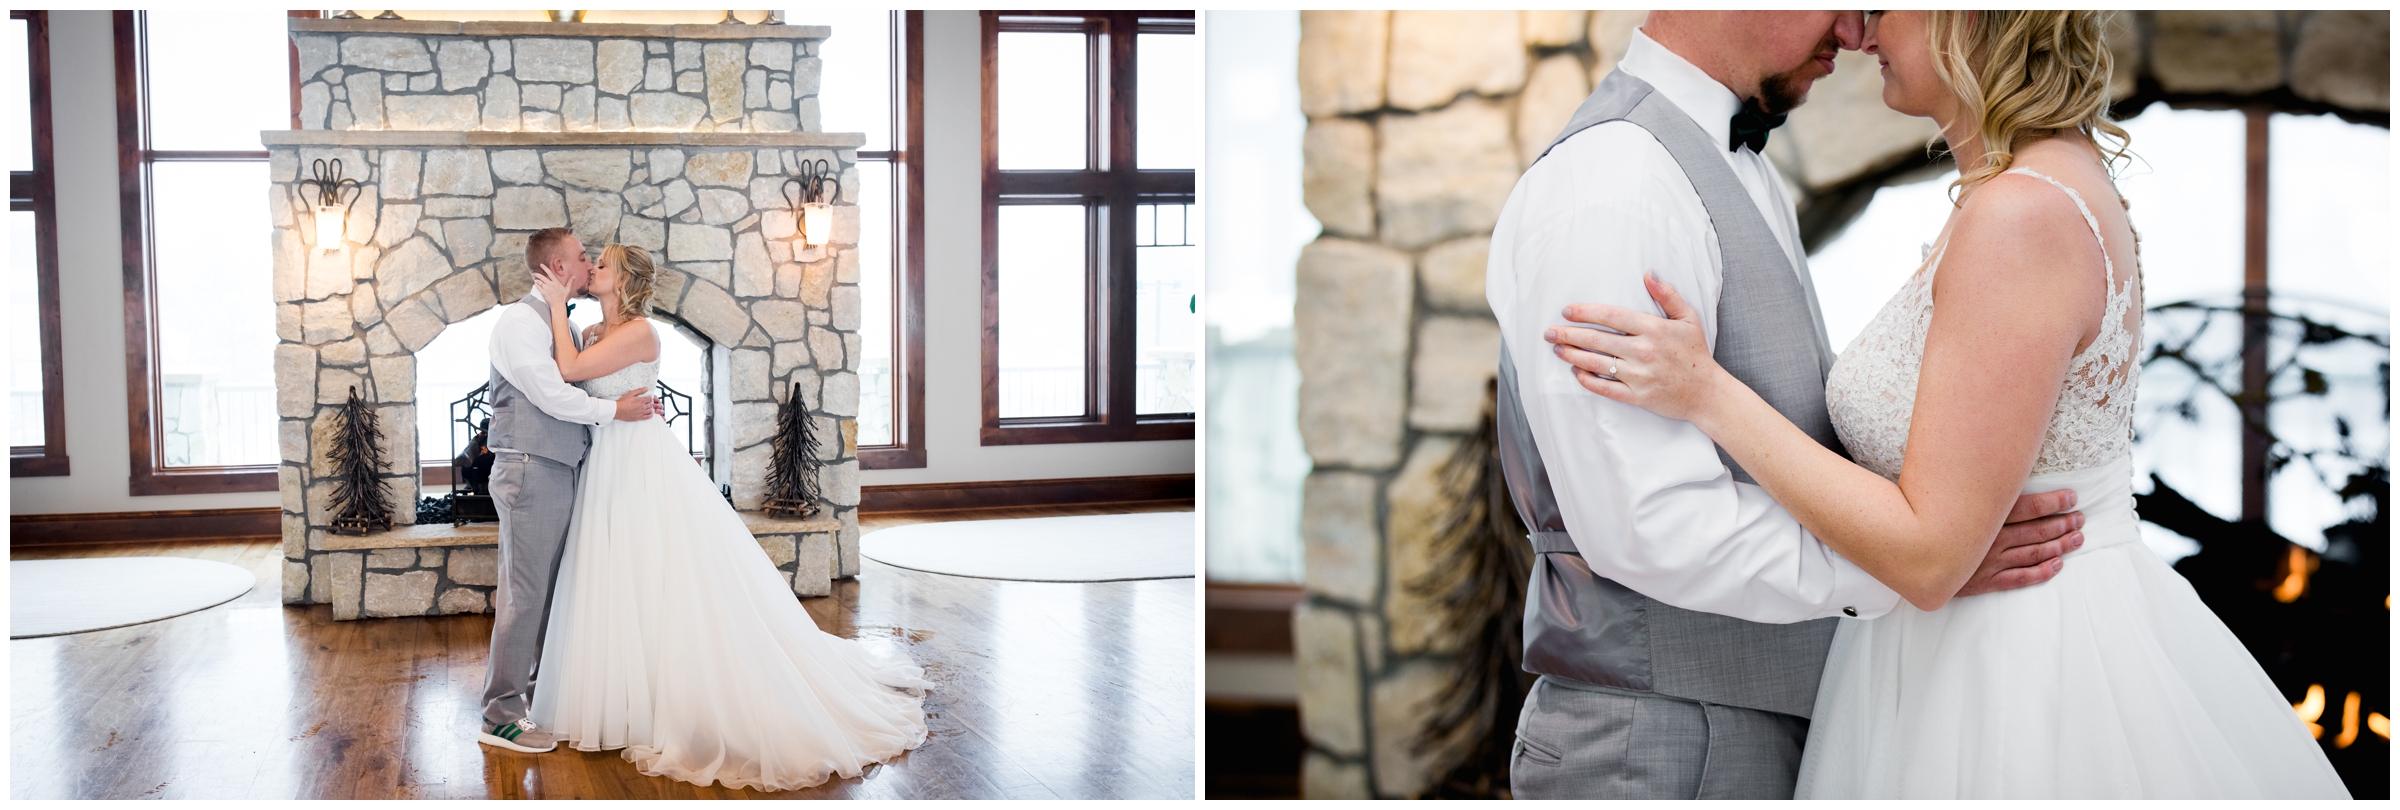 bride and groom kissing in front of fireplace at Castle Pines Colorado wedding